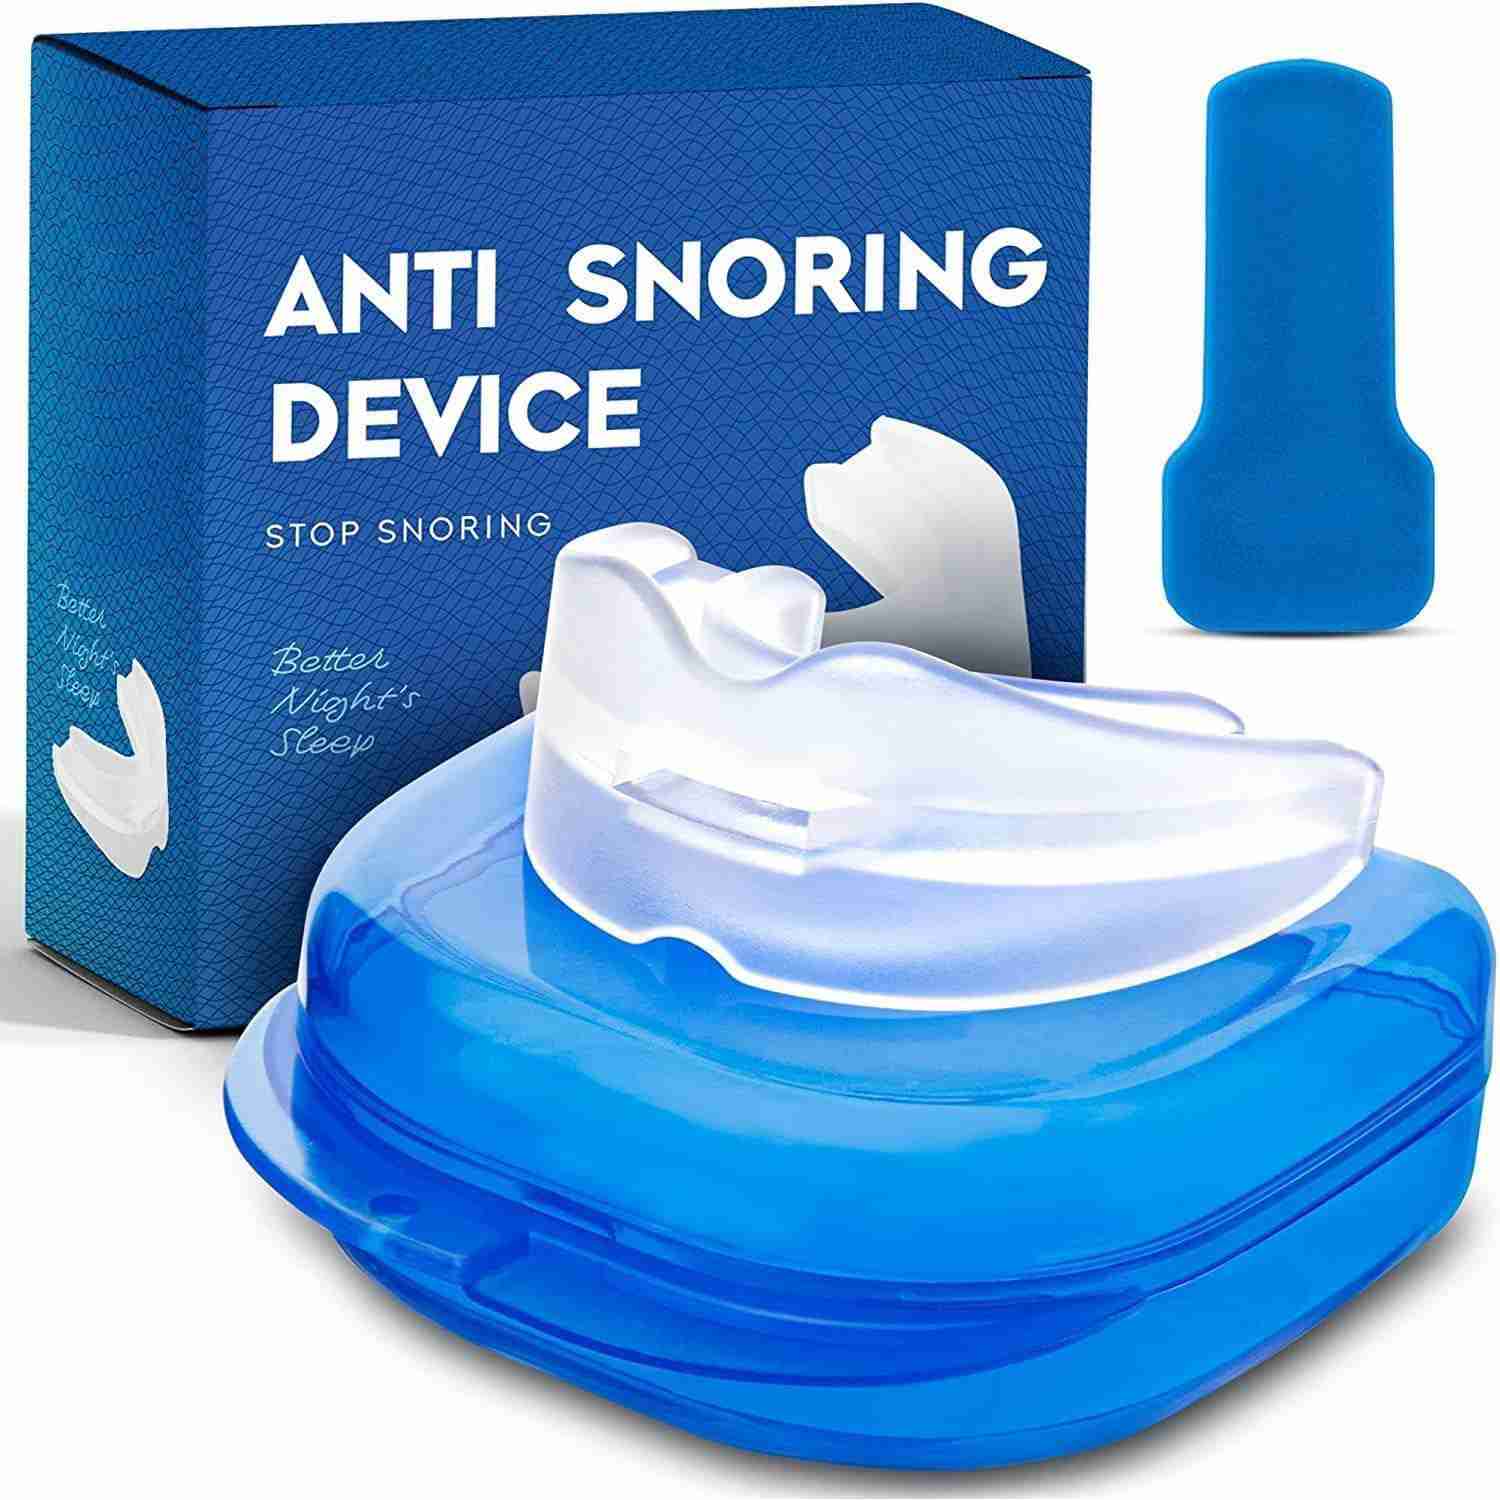 sozg-anti-snoring-devices with cash back rebate